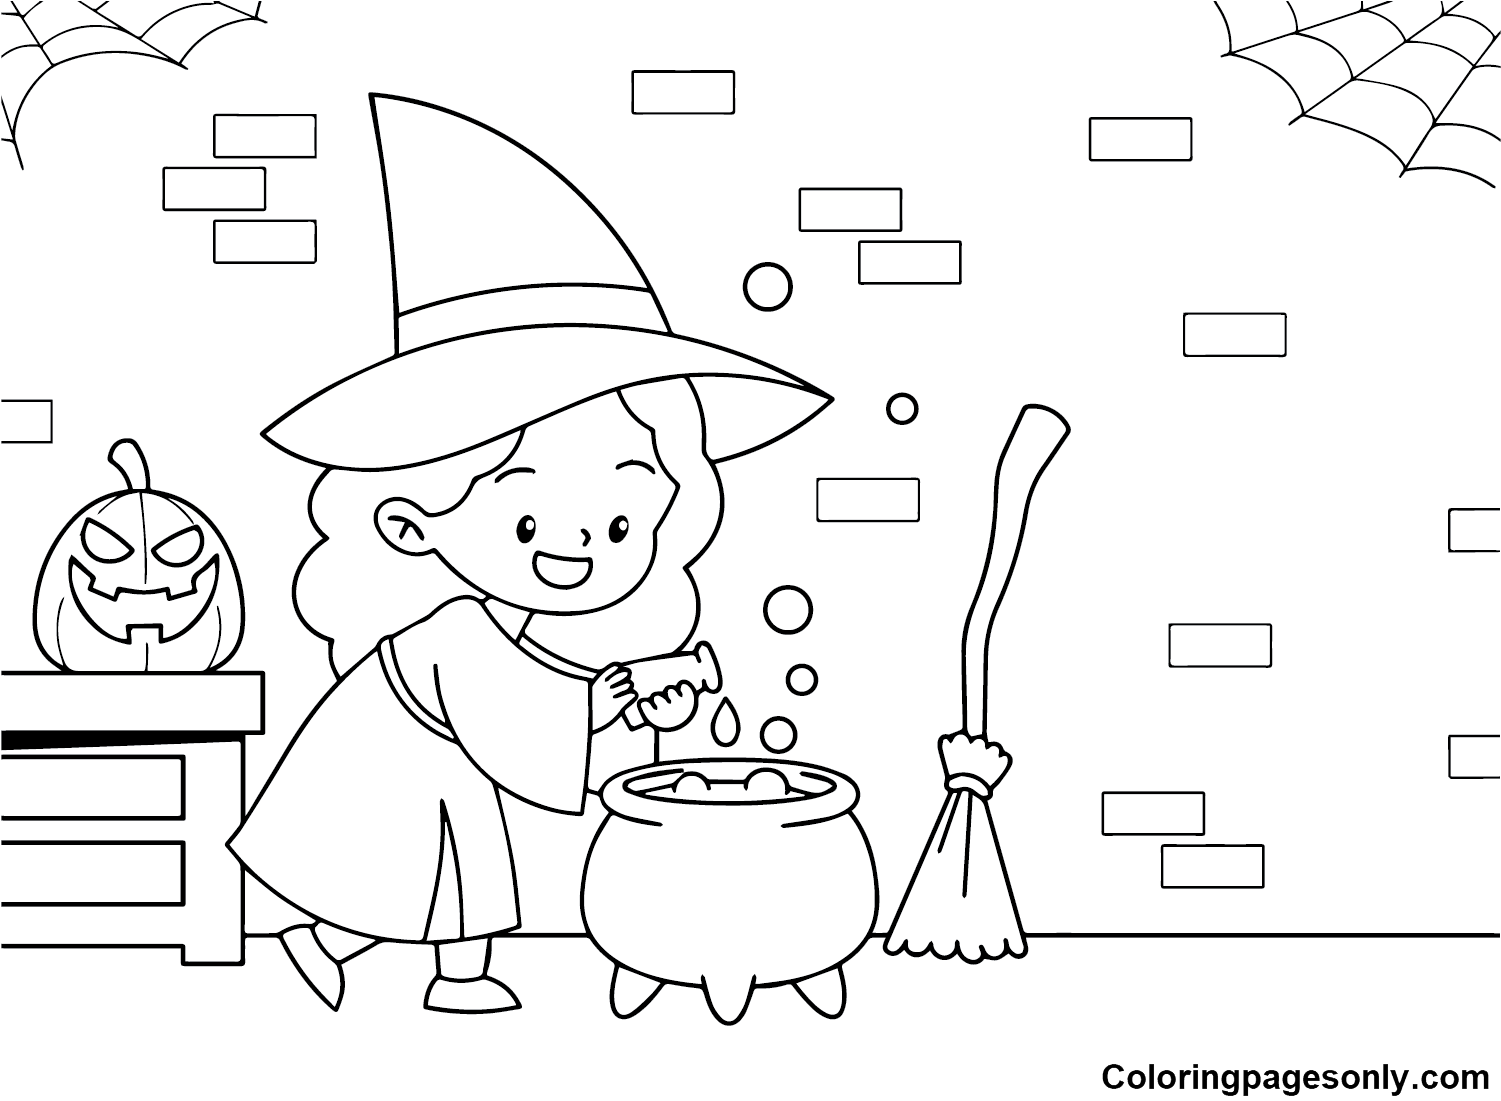 Hocus Pocus Witches Images Coloring Page